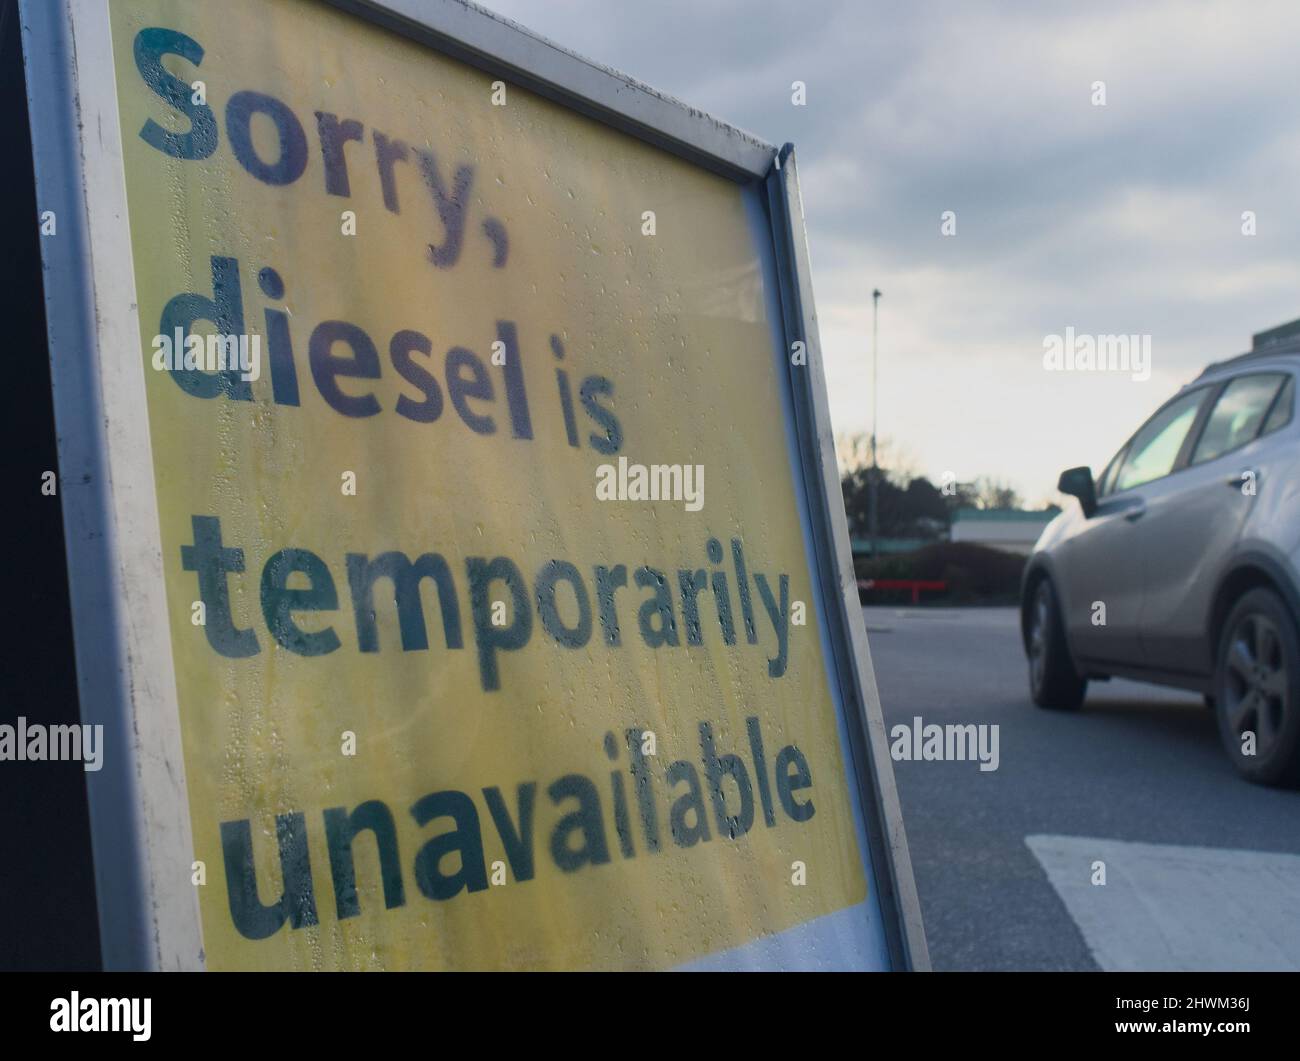 A sign at a fuel station at Morrisons supermarket in Bodmin, UK, reads 'Sorry, diesel is temporarily unavailable'. Car in background. Stock Photo